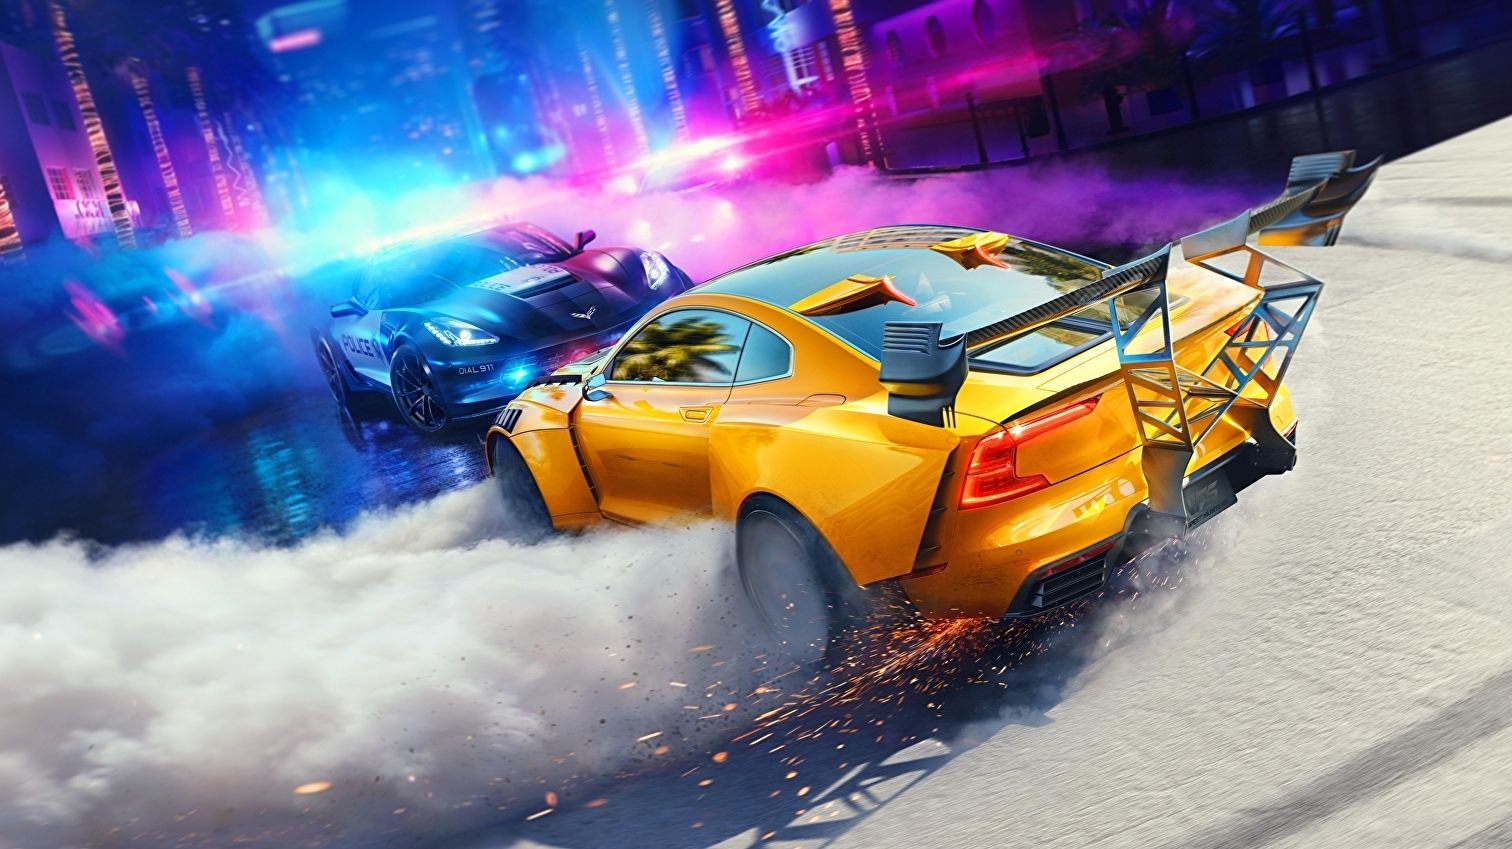 Criterions New Need For Speed Will Reportedly Launch This November